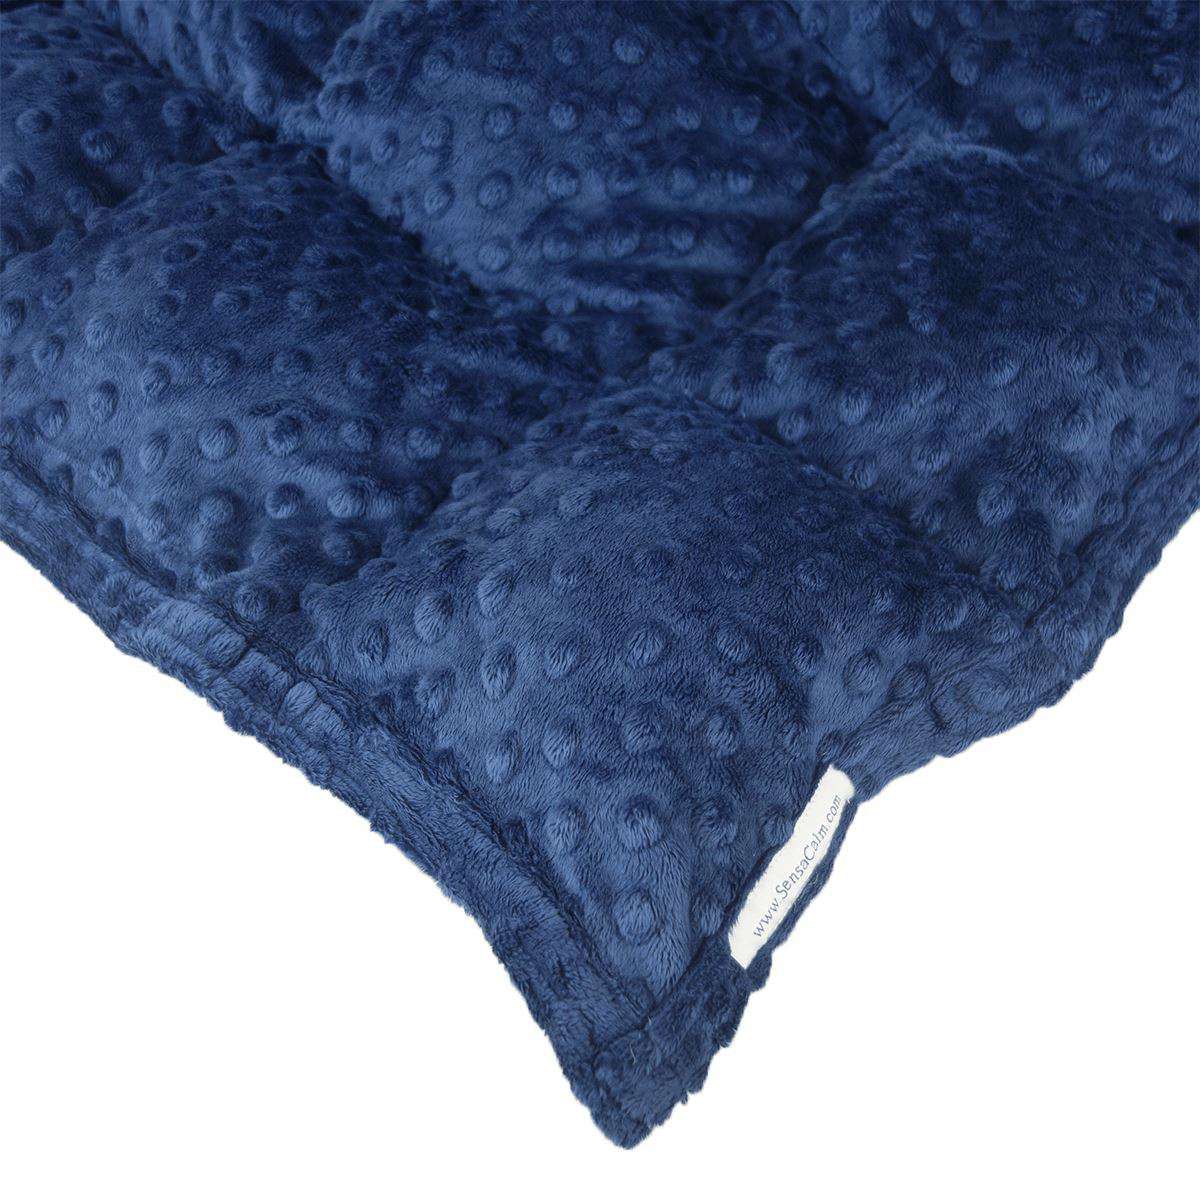 Dimple Cuddle Weighted Blanket -  Navy